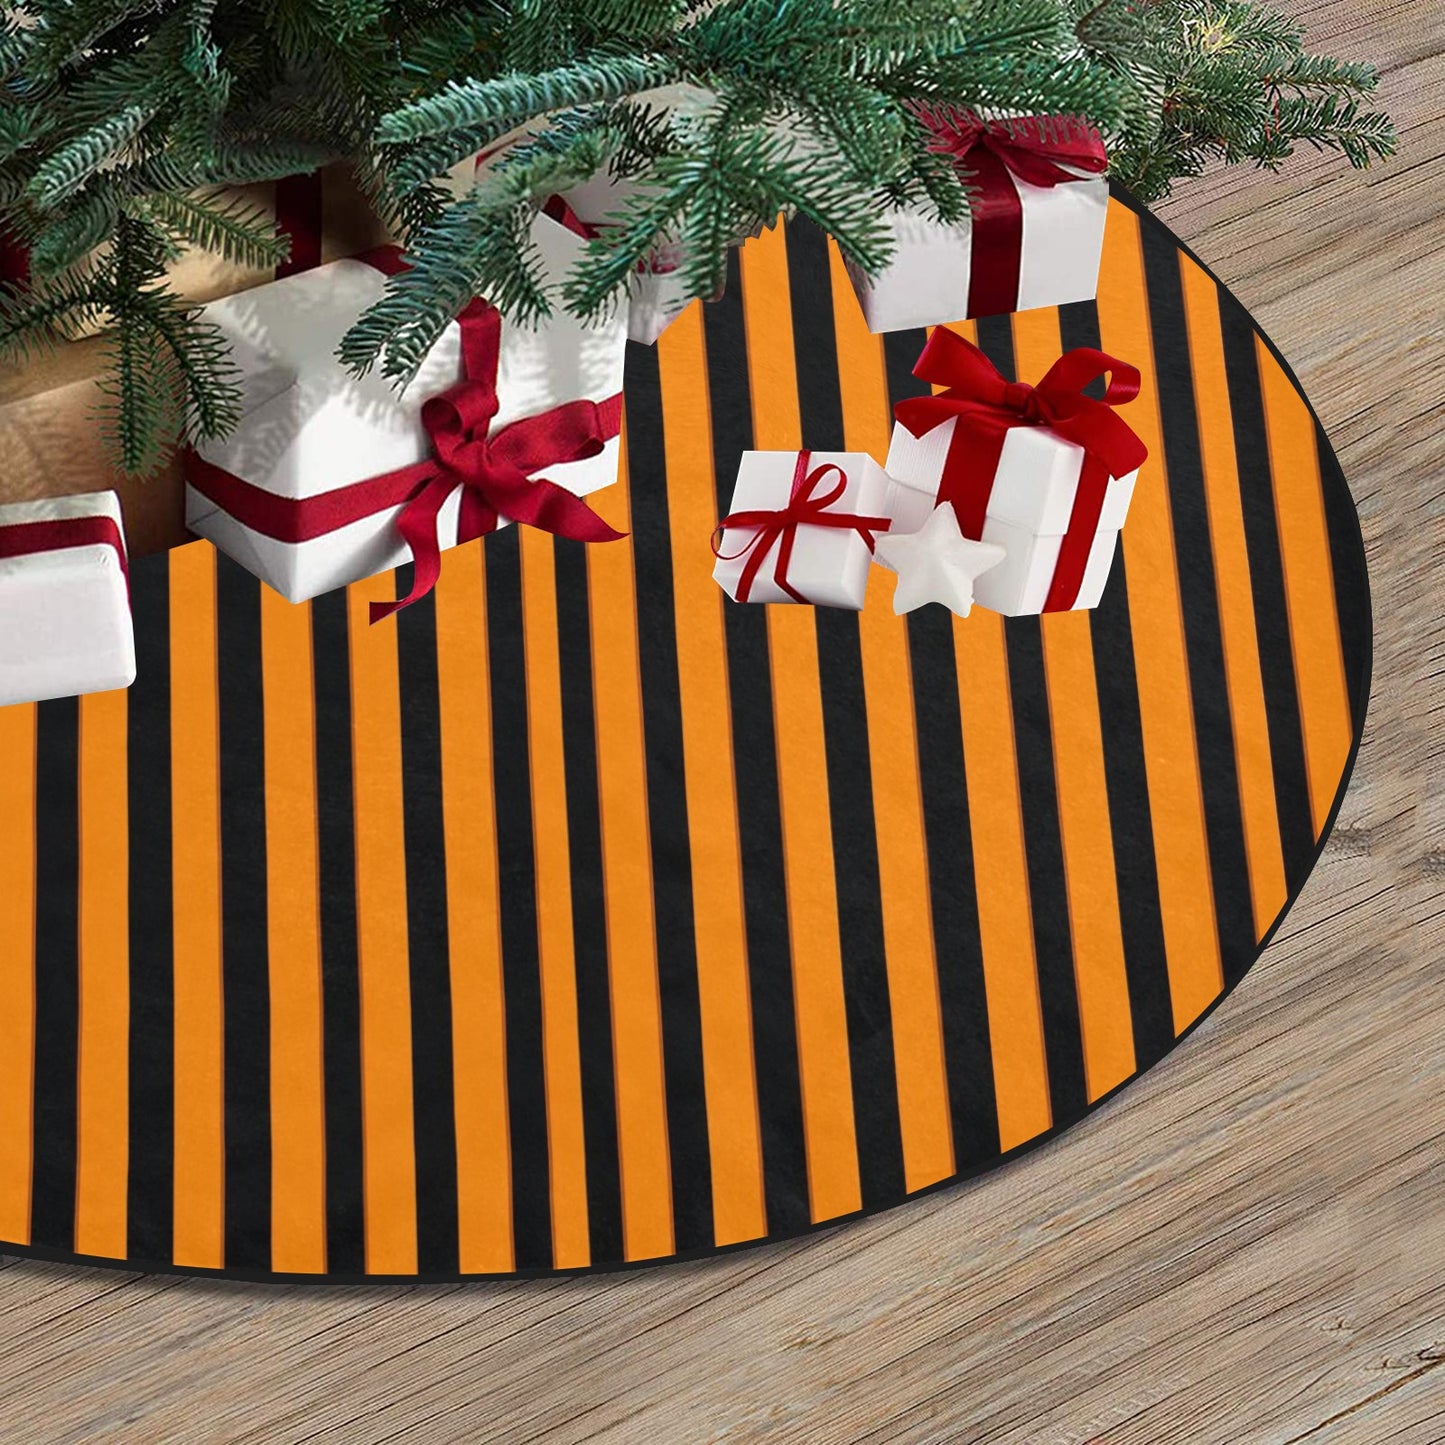 Orange Black Striped Halloween Tree Skirt, Small Large Christmas Stand Base Cover Home Decor Decoration All Hallows Eve Creepy Spooky Party Starcove Fashion